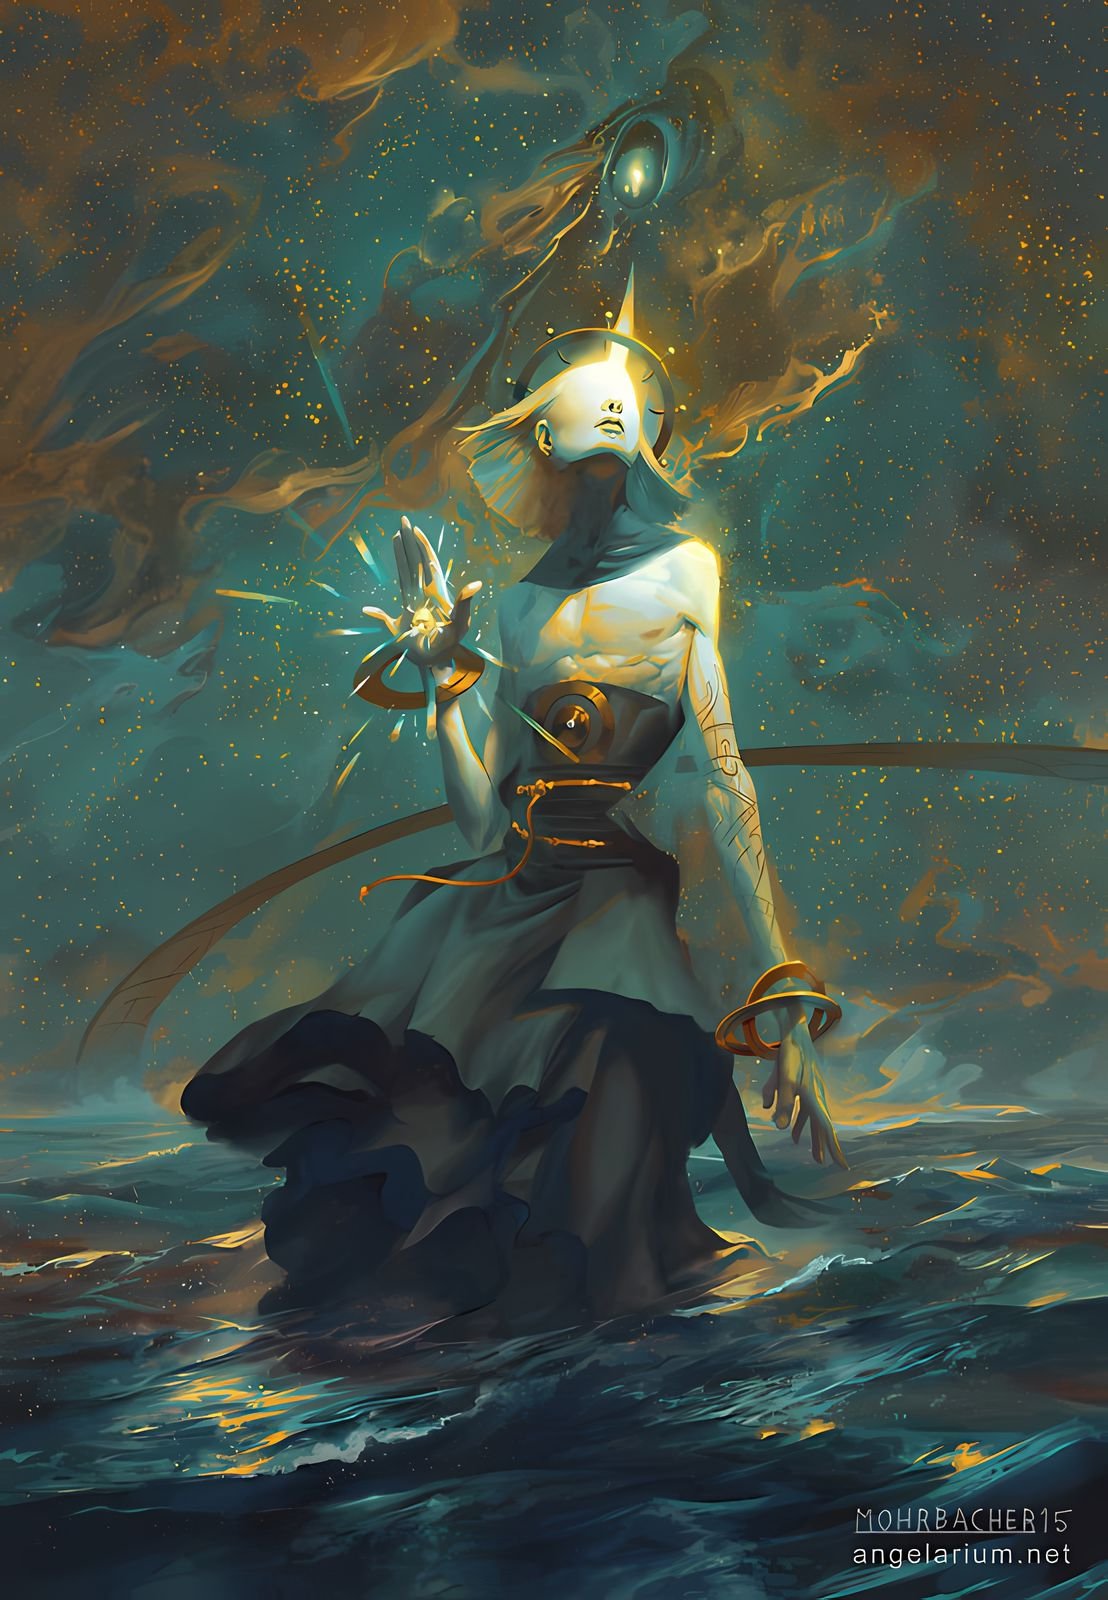 Peter Mohrbacher Blends Surrealism With Fantasy To Create Powerful Magical Beings (6)